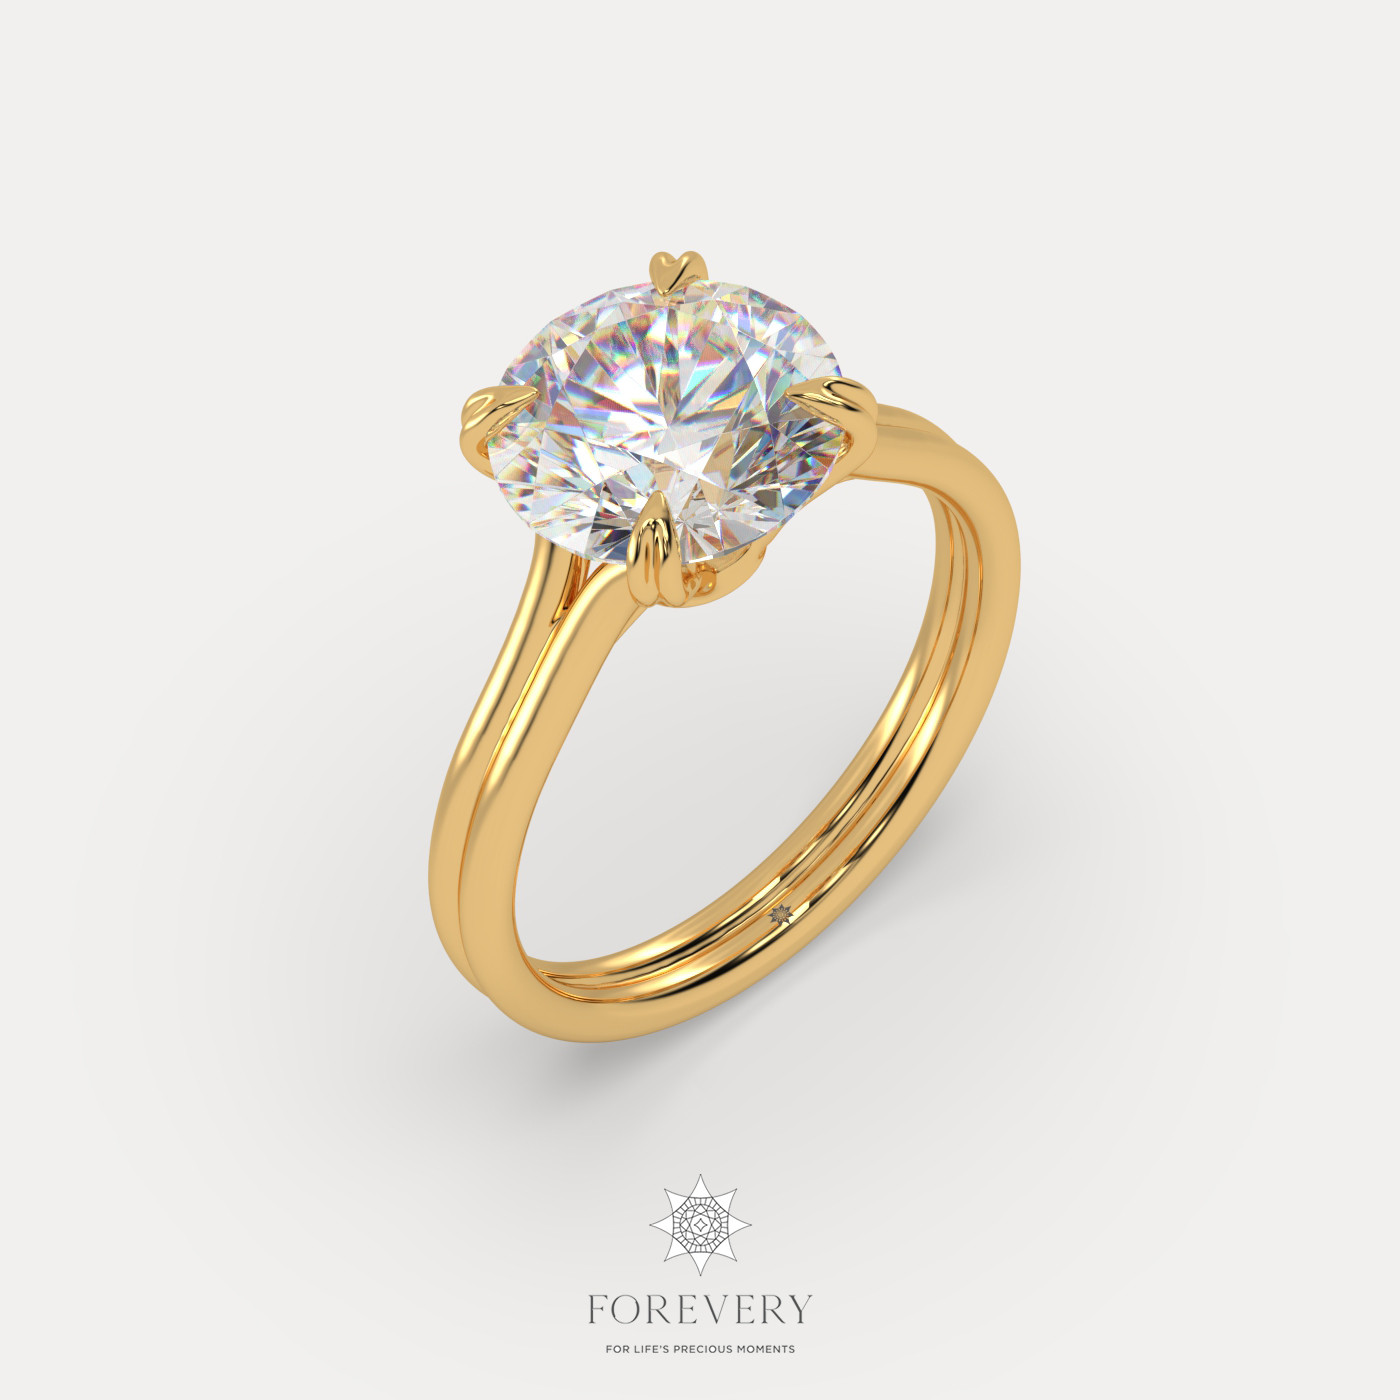 18K YELLOW GOLD Round Cut Diamond Solitaire Engagament Ring